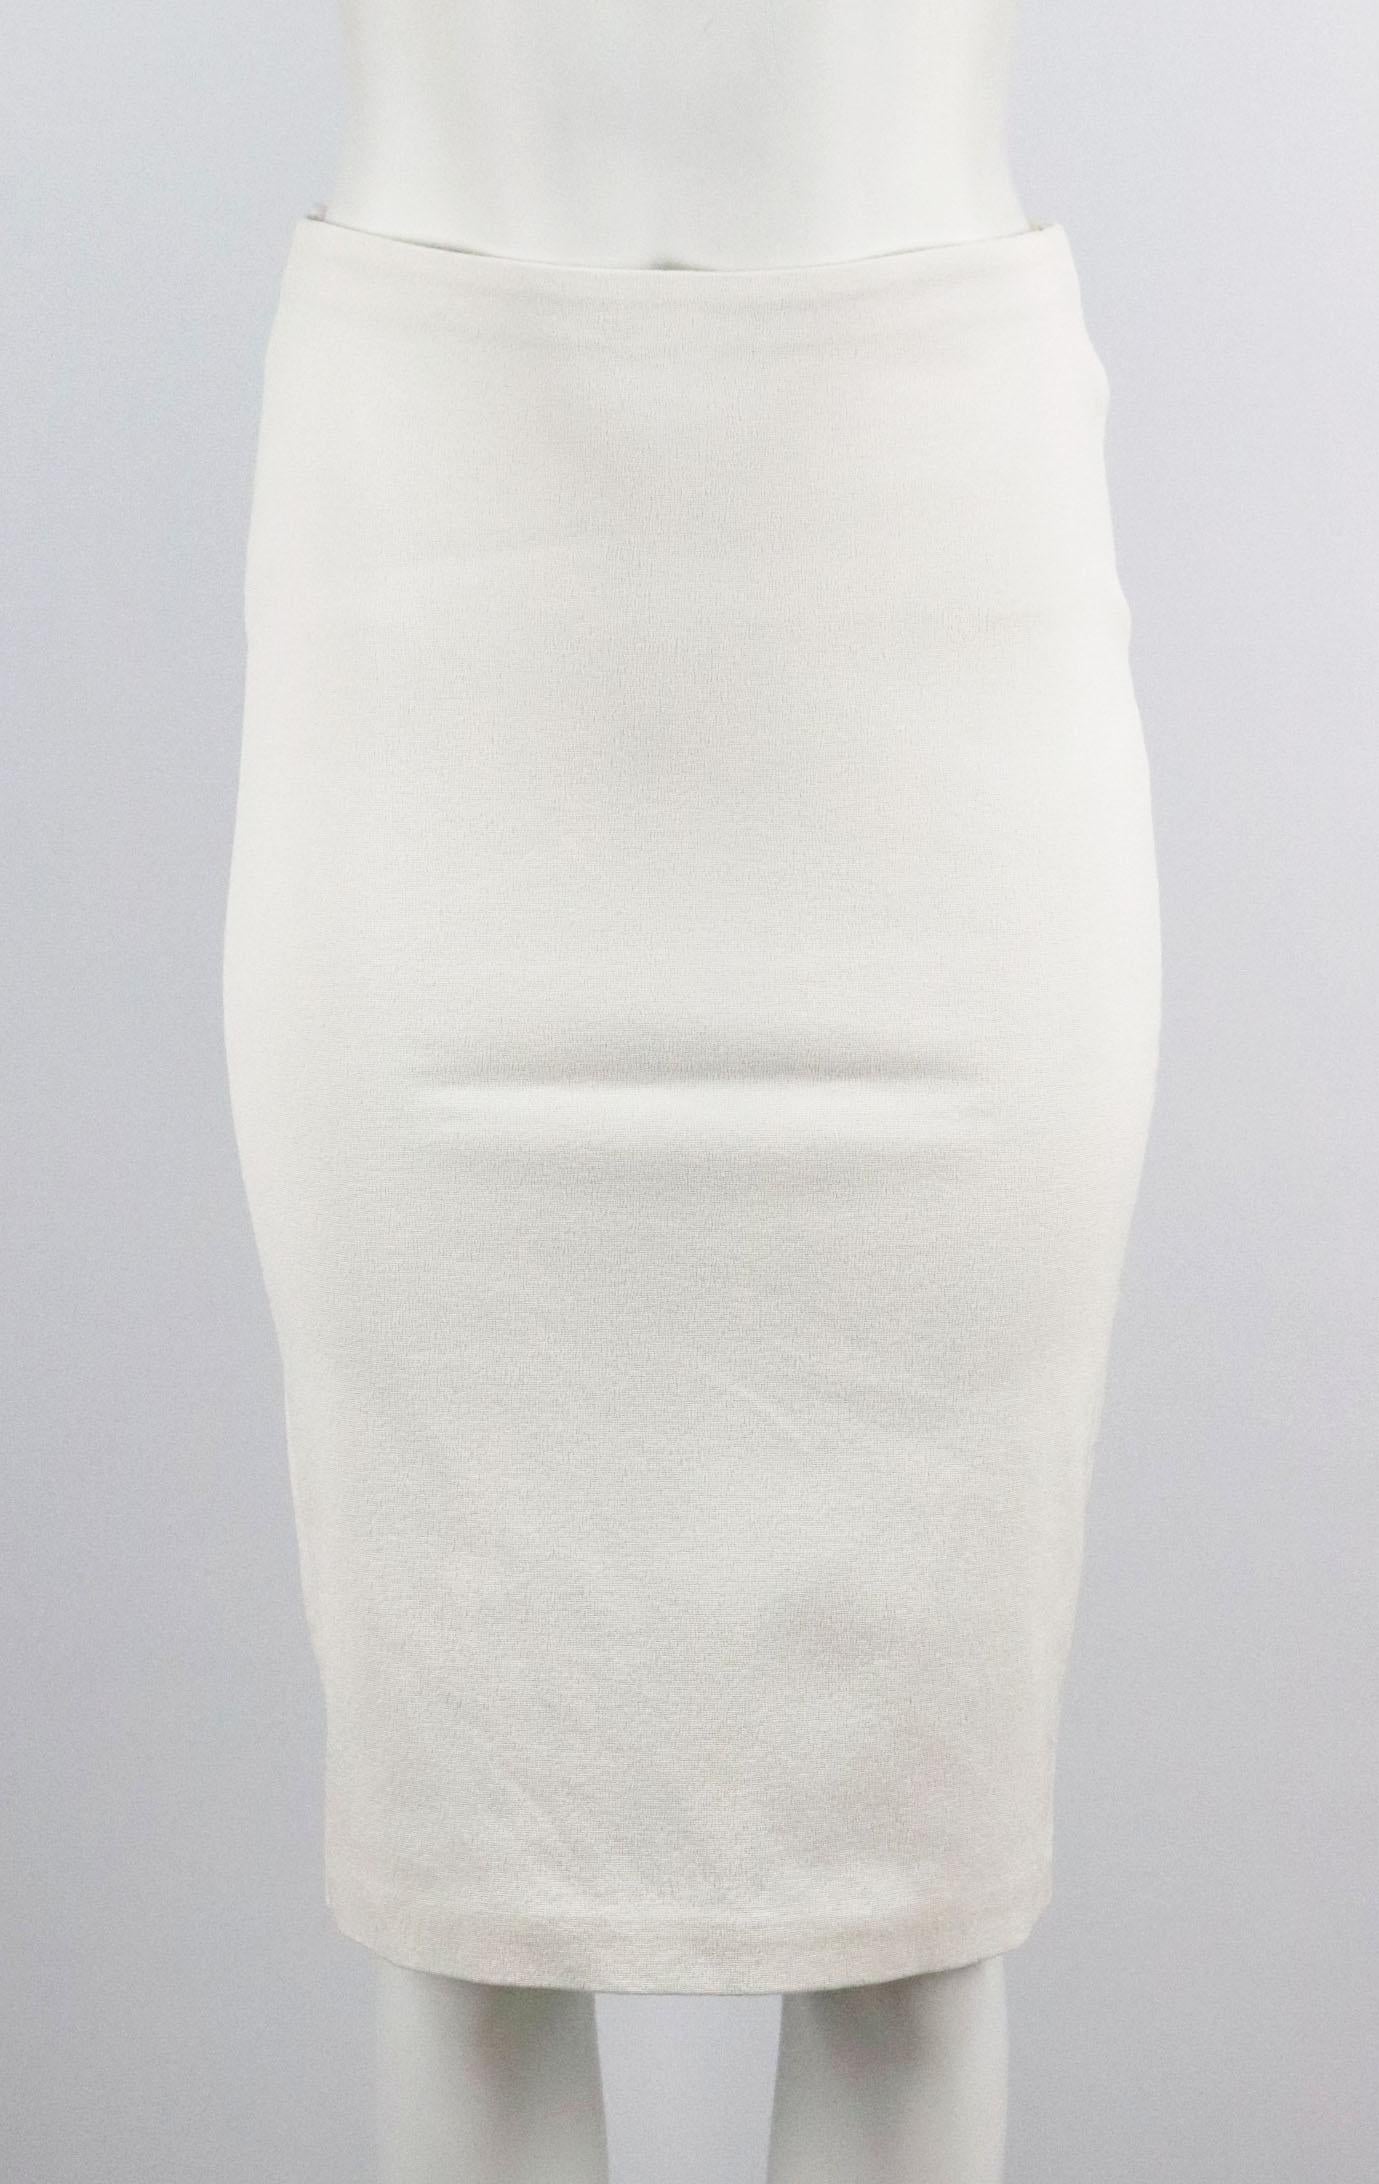 This pencil skirt by Tom Ford is cut from textured stretch viscose-blend with wrap effect at the back to let skirt hug your figure while you walk.
Ivory viscose-blend.
Pulls on.
57% Viscose, 41% cotton, 2% elastodiene; lining: 96% silk, 4%